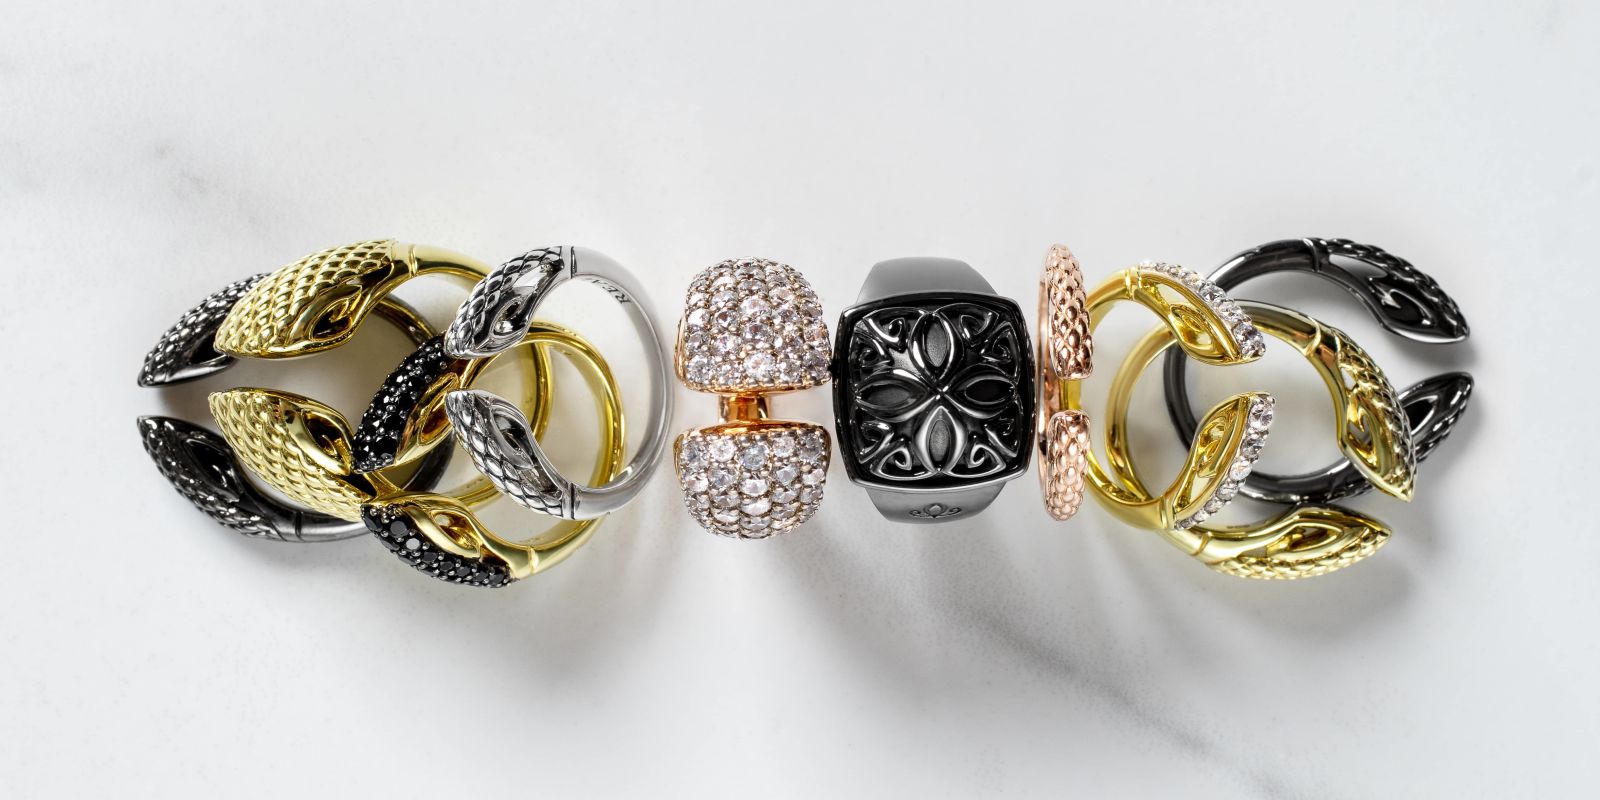 A Group Of Gold And Silver Rings